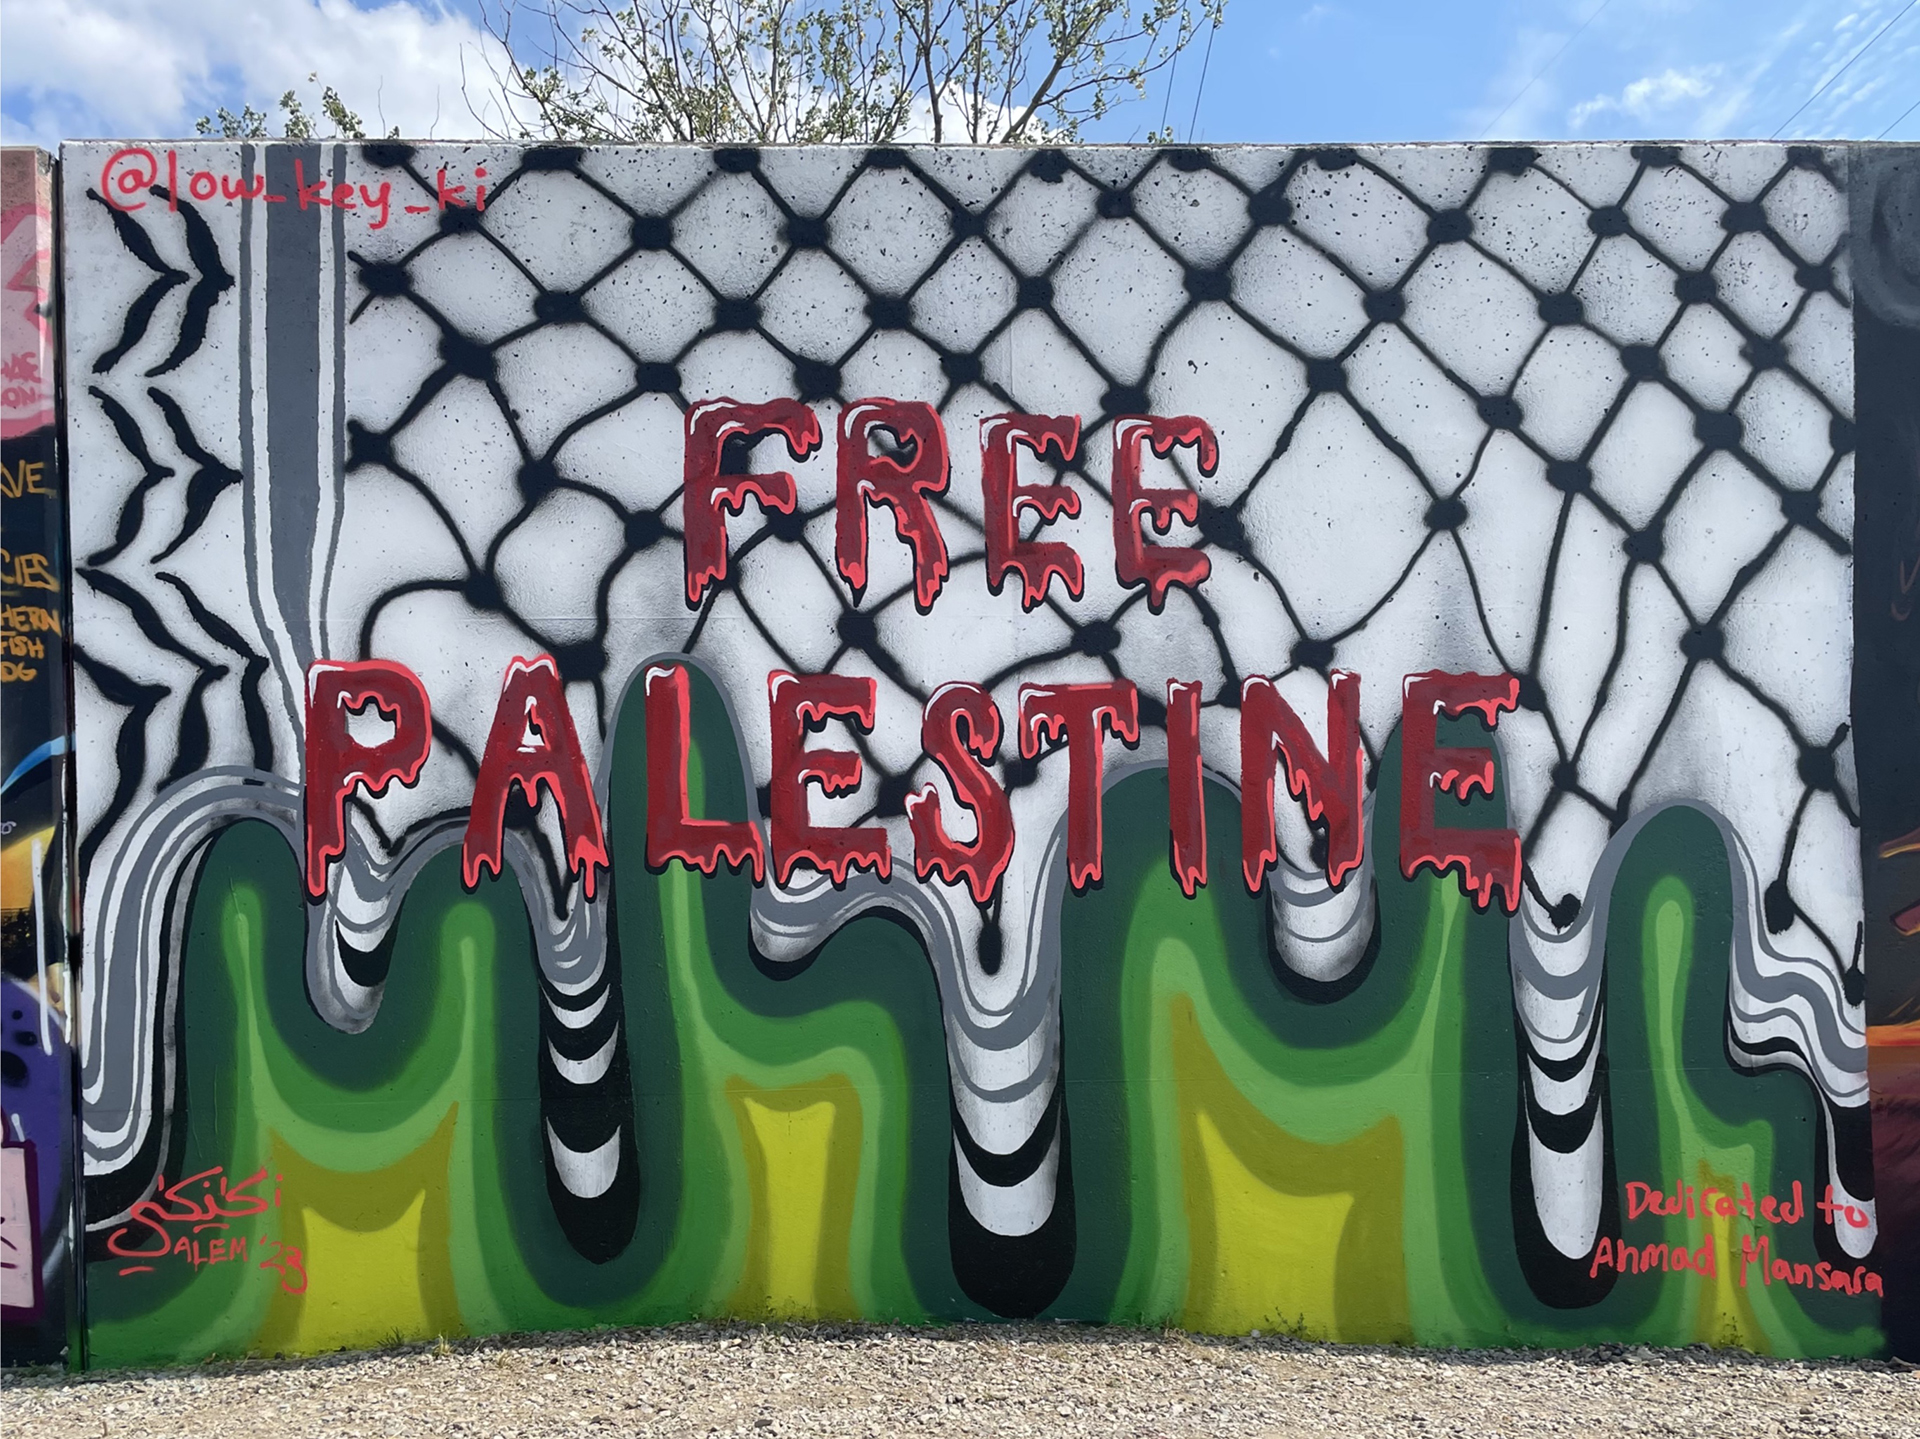 FREE PALESTINE, Aerosol, Acrylic on Concrete, 20’ x 16’, 2023, Made during  Paint Louis in St. Louis, MO, Dedicated to Ahmad Manasra